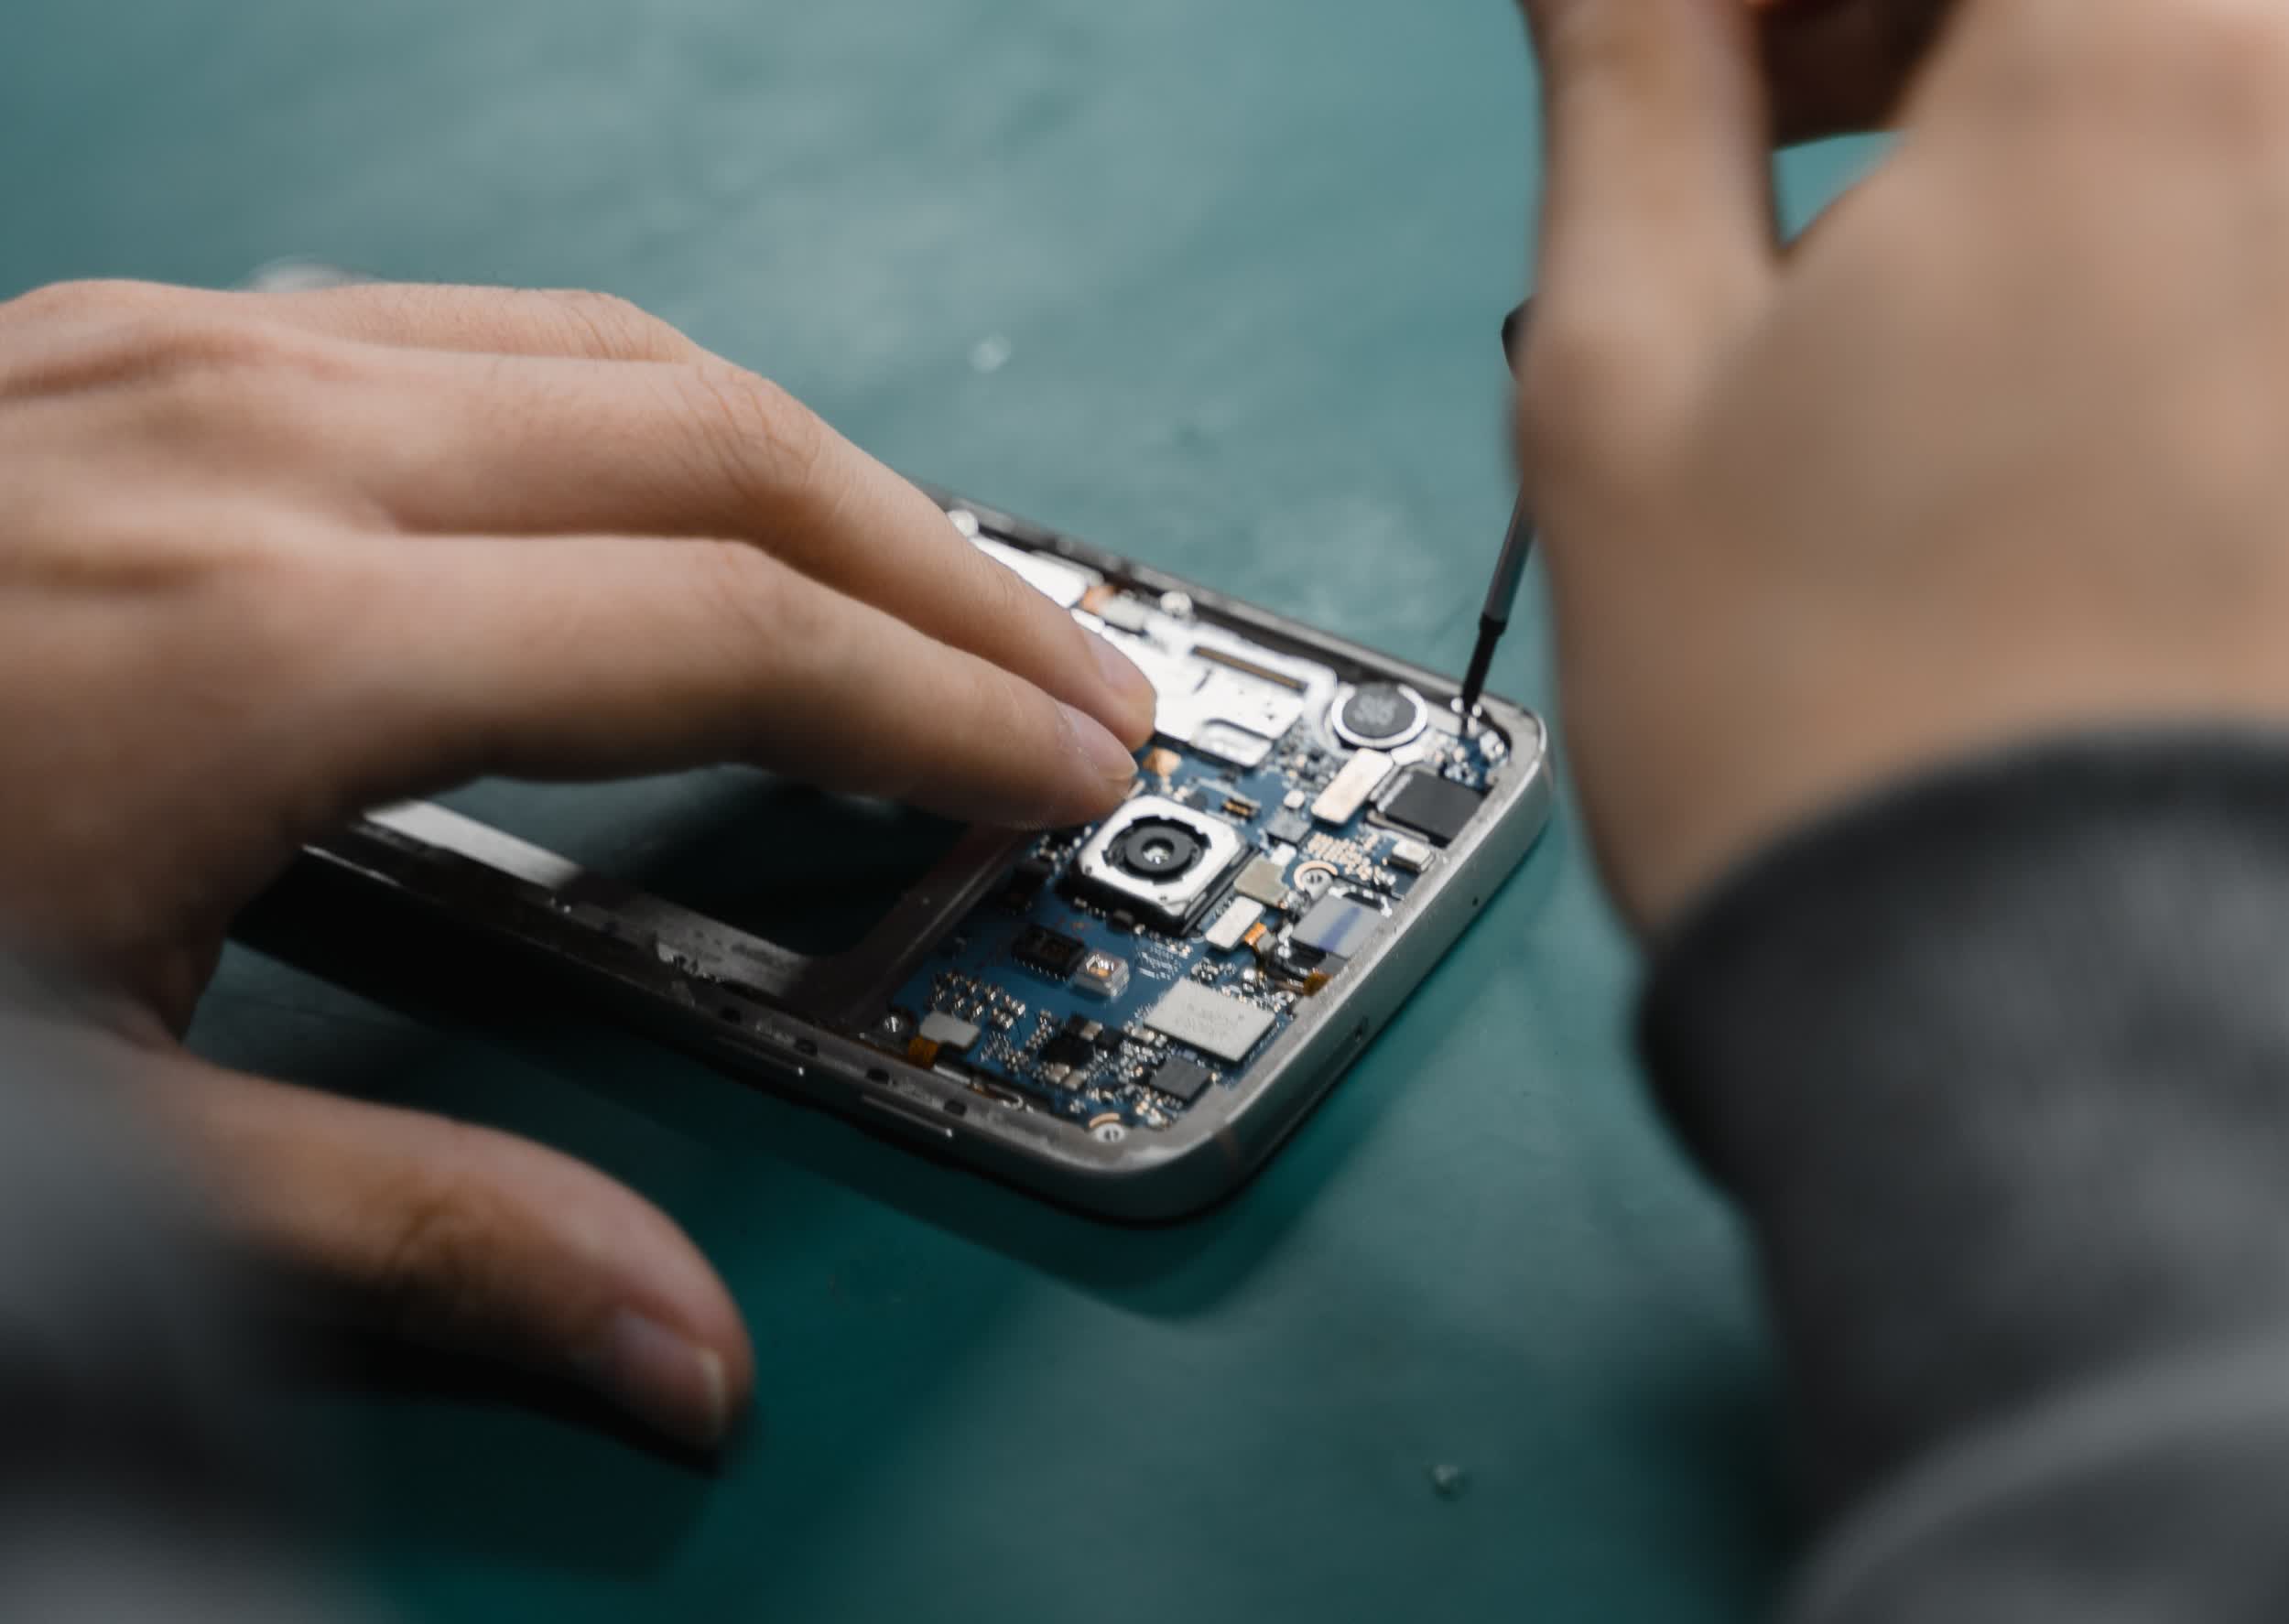 Samsung's Maintenance Mode aims to hide your private information from repair techs